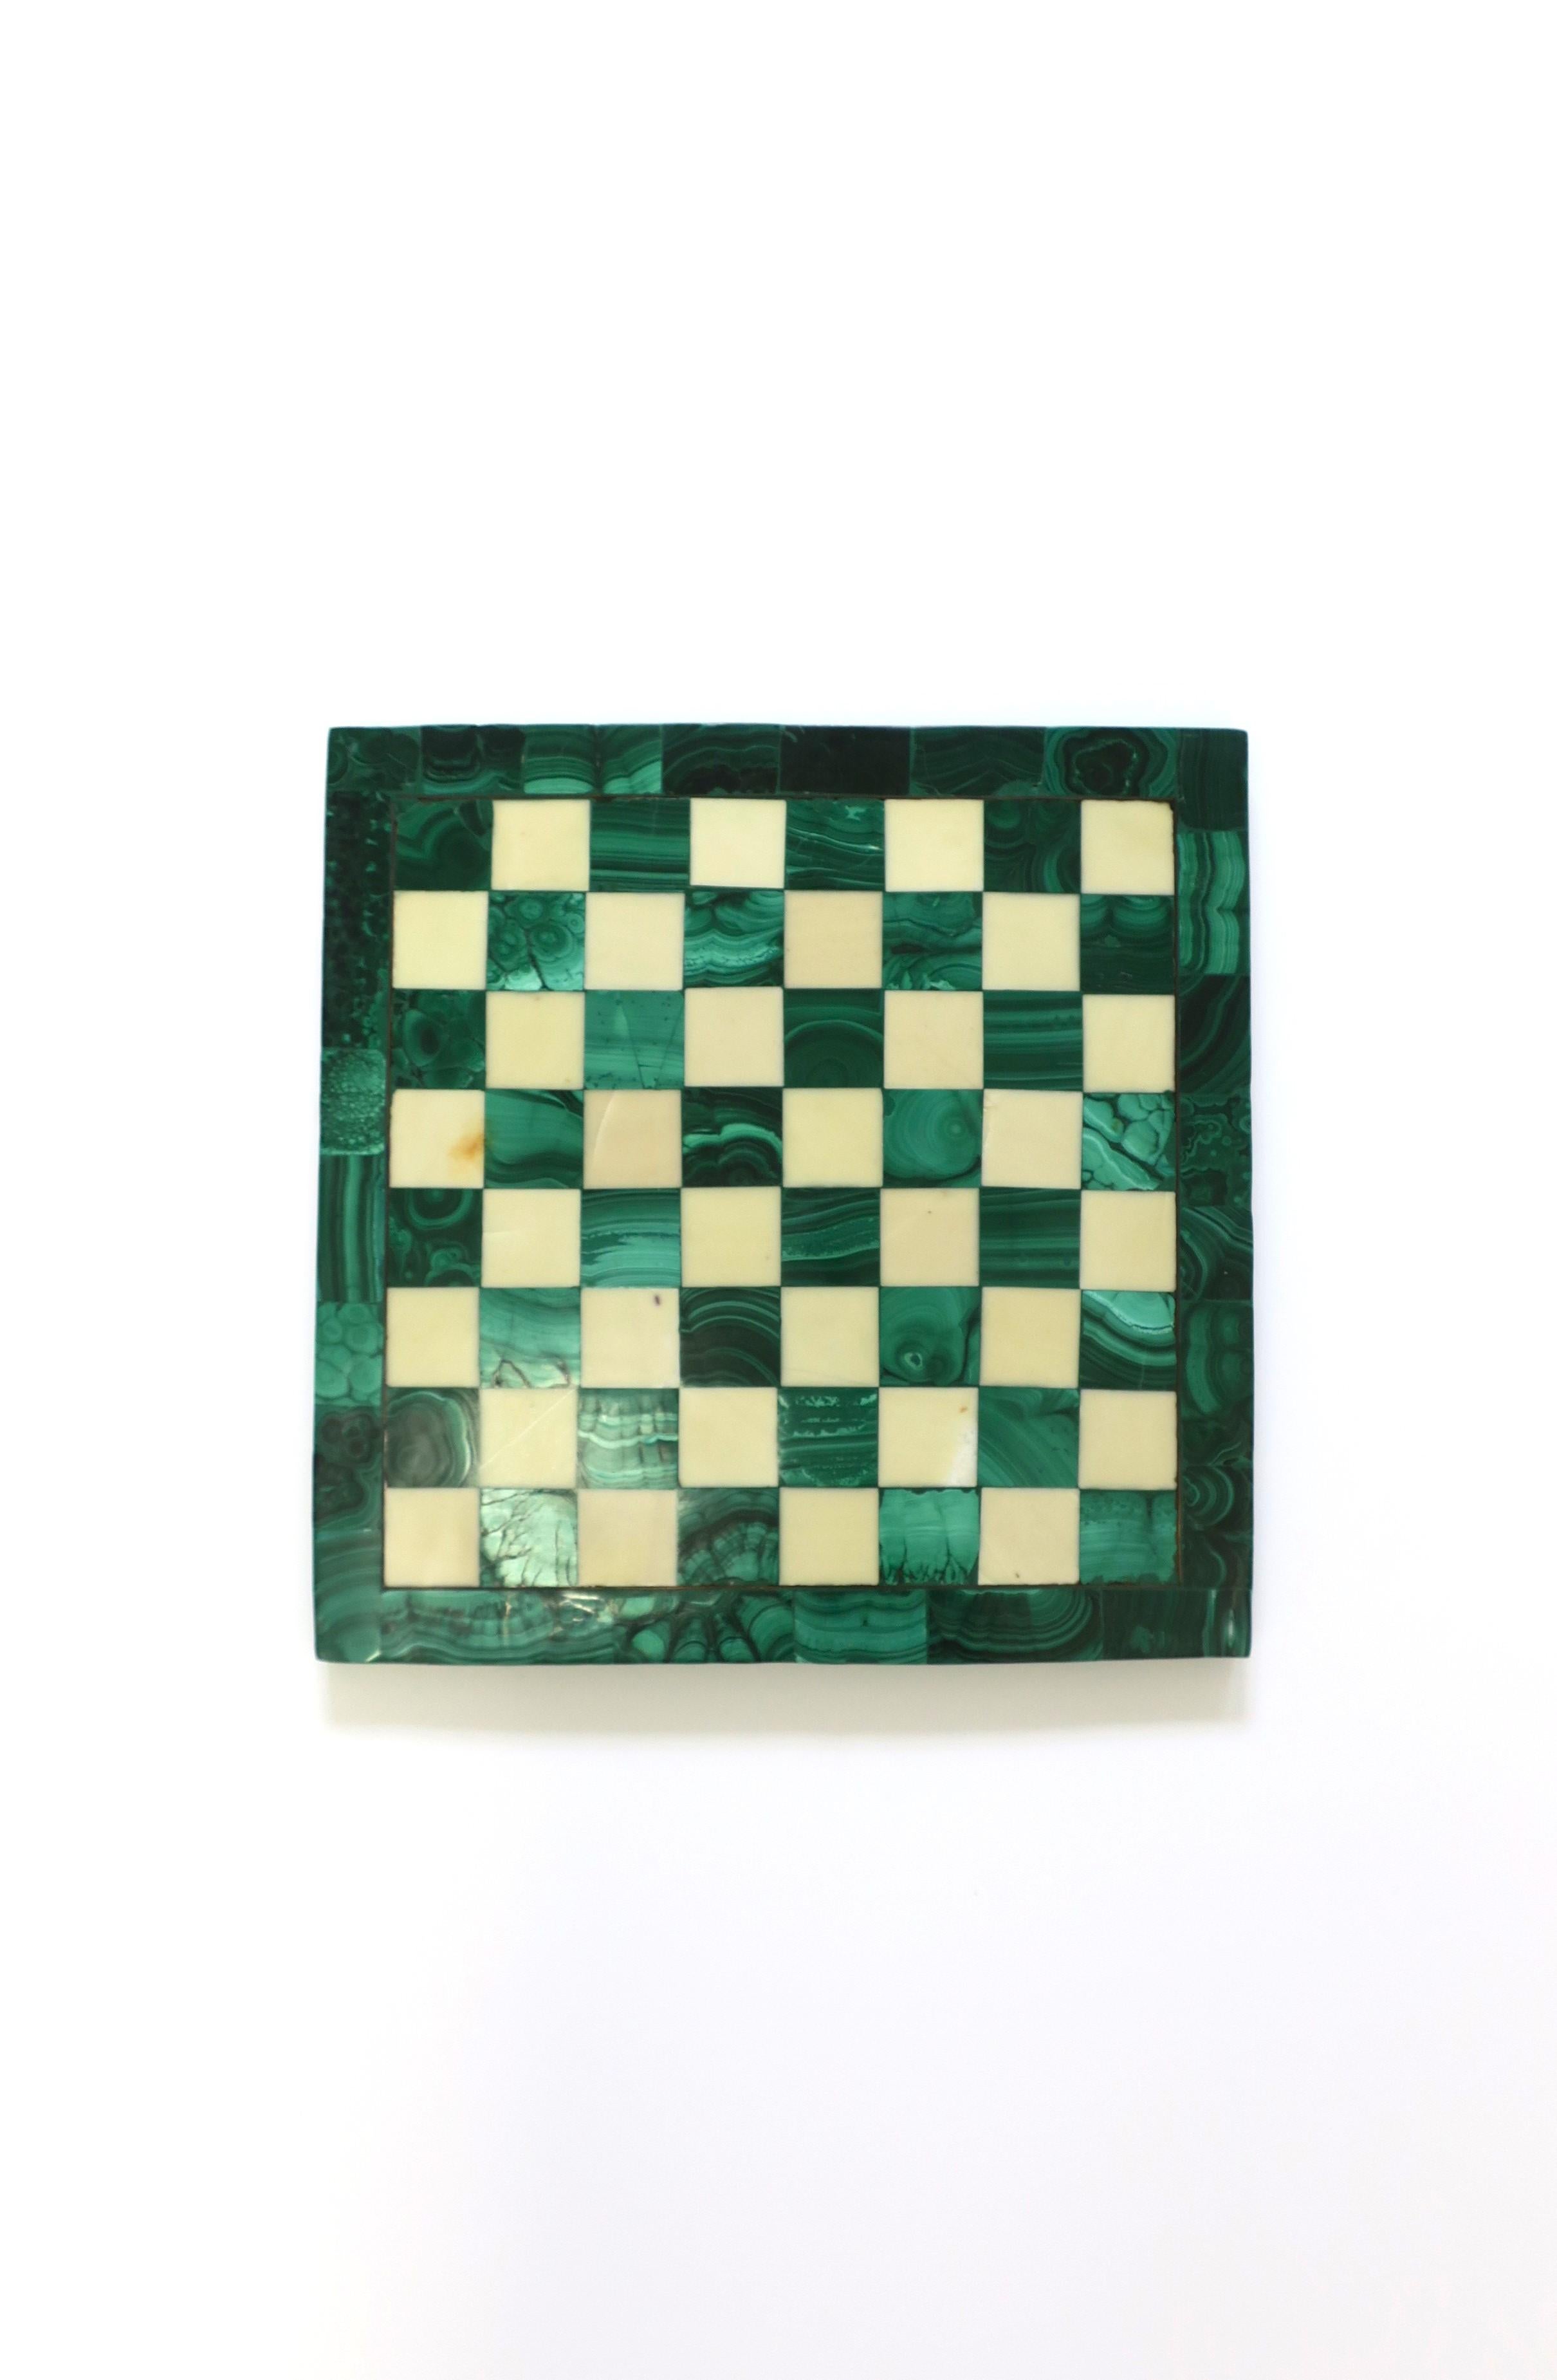 A green malachite and marble chess board, circa mid-20th. Game board is made of green malachite and off-white marble. Dimensions: 9